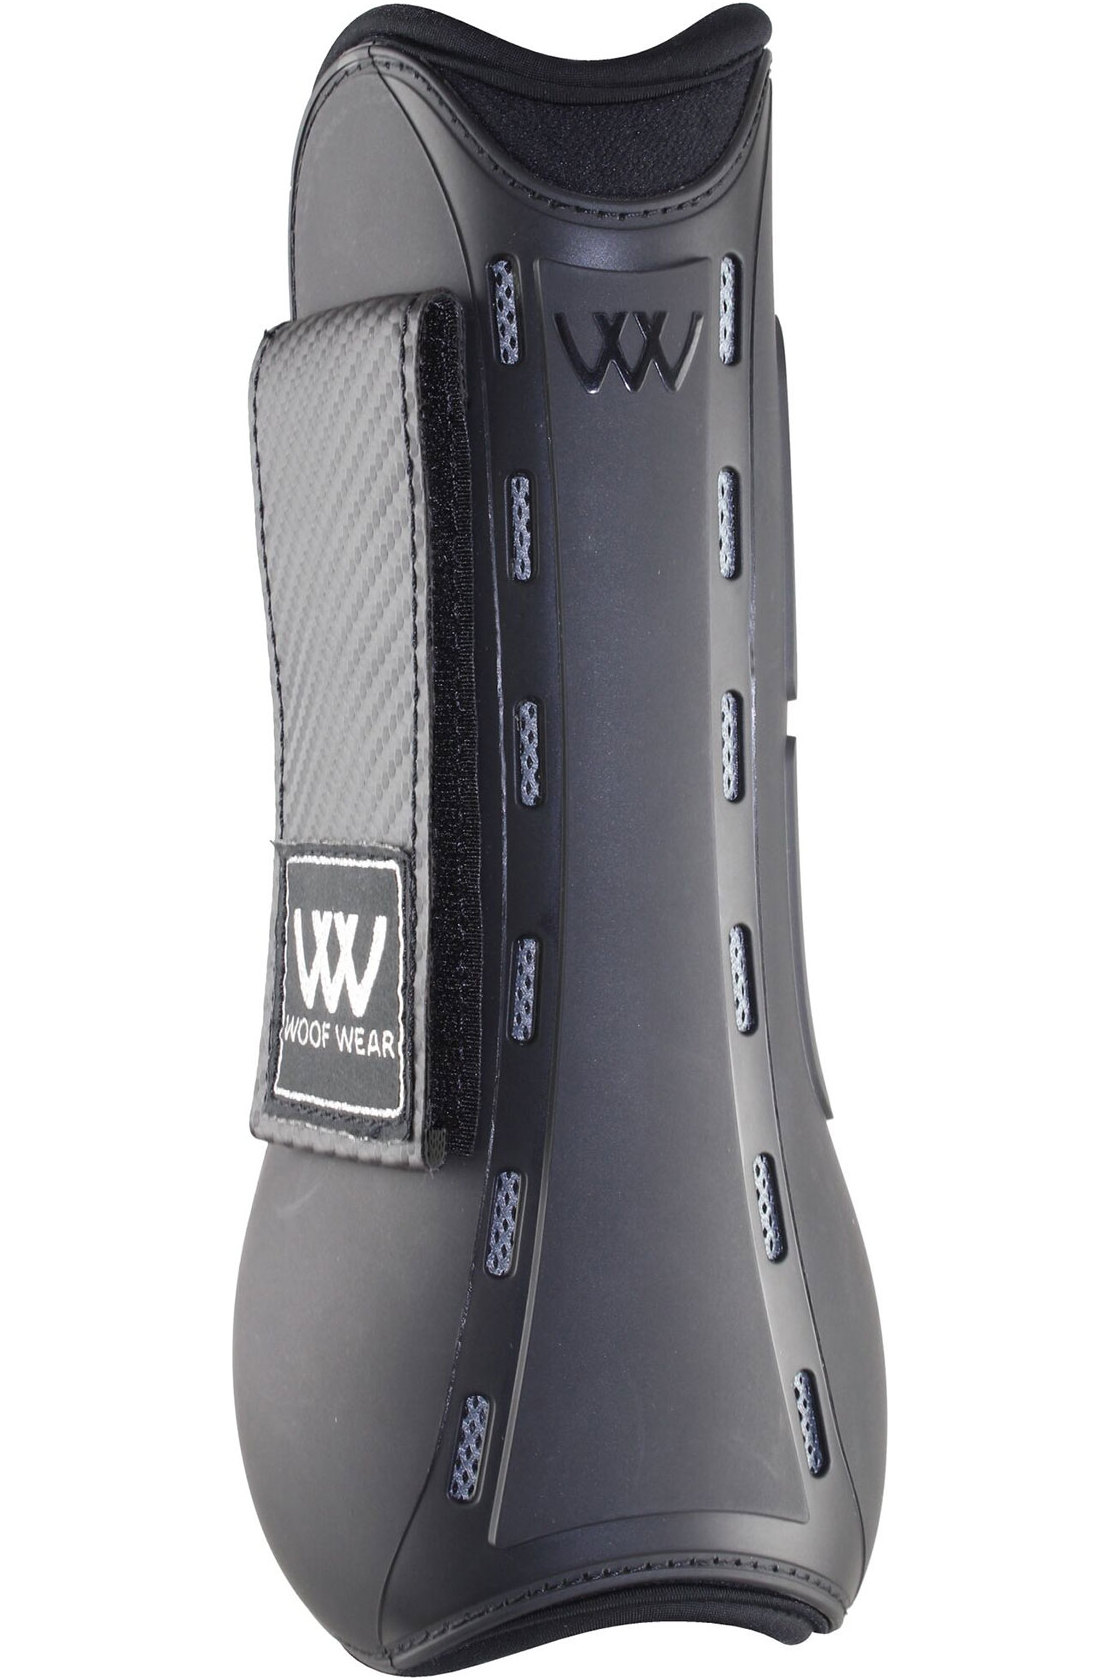 Woof Wear Pro Tendon Boots - Black | The Drillshed